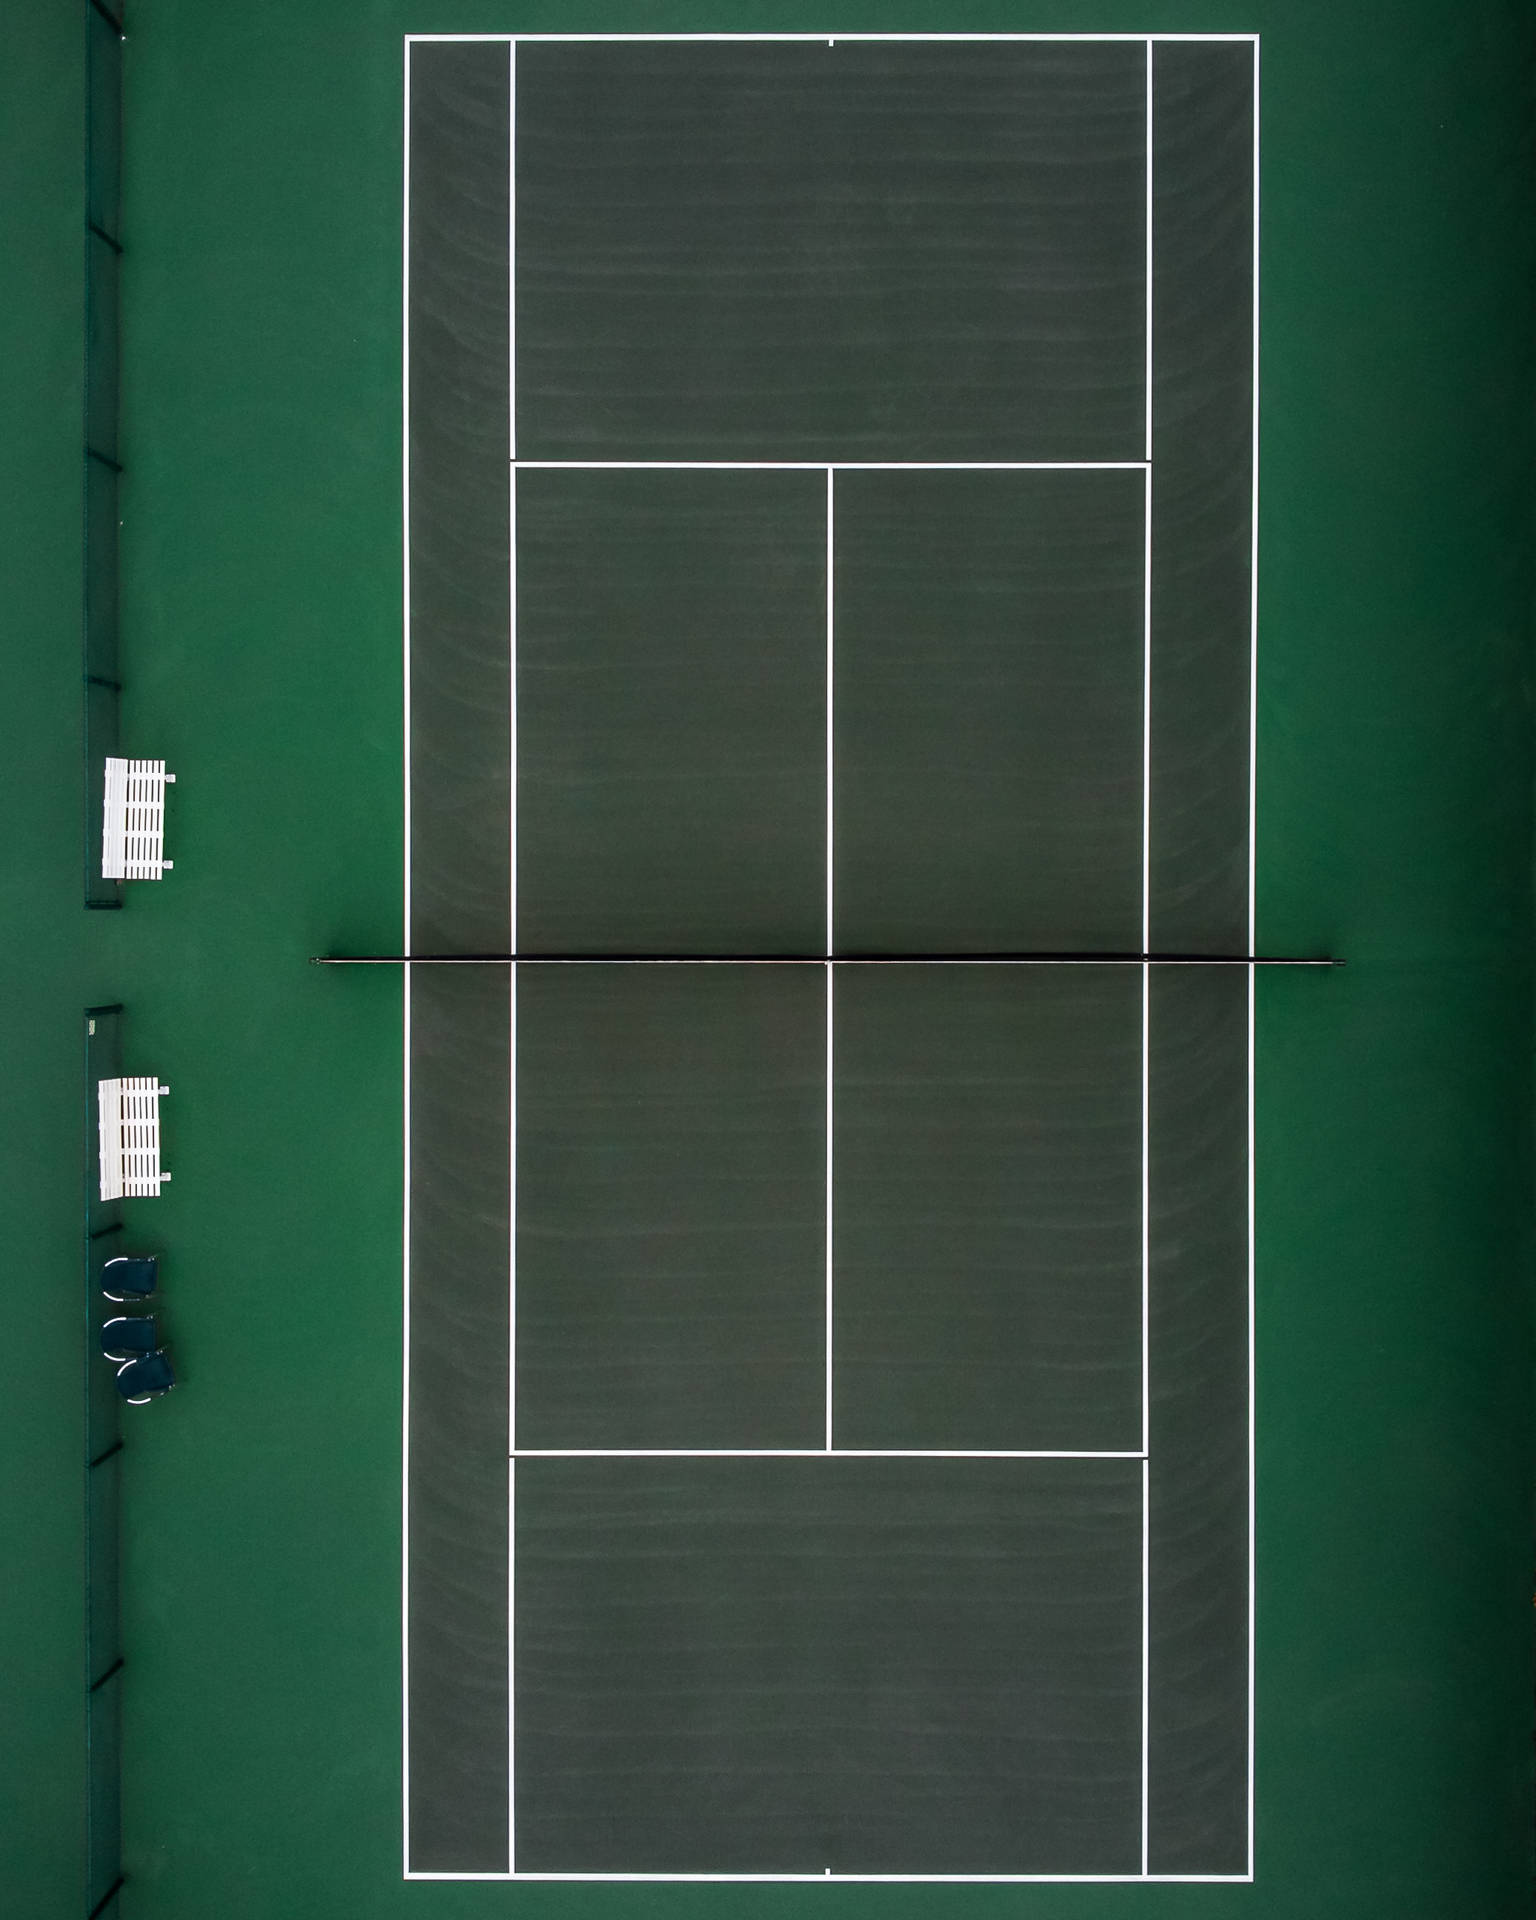 2074X2593 Tennis Wallpaper and Background